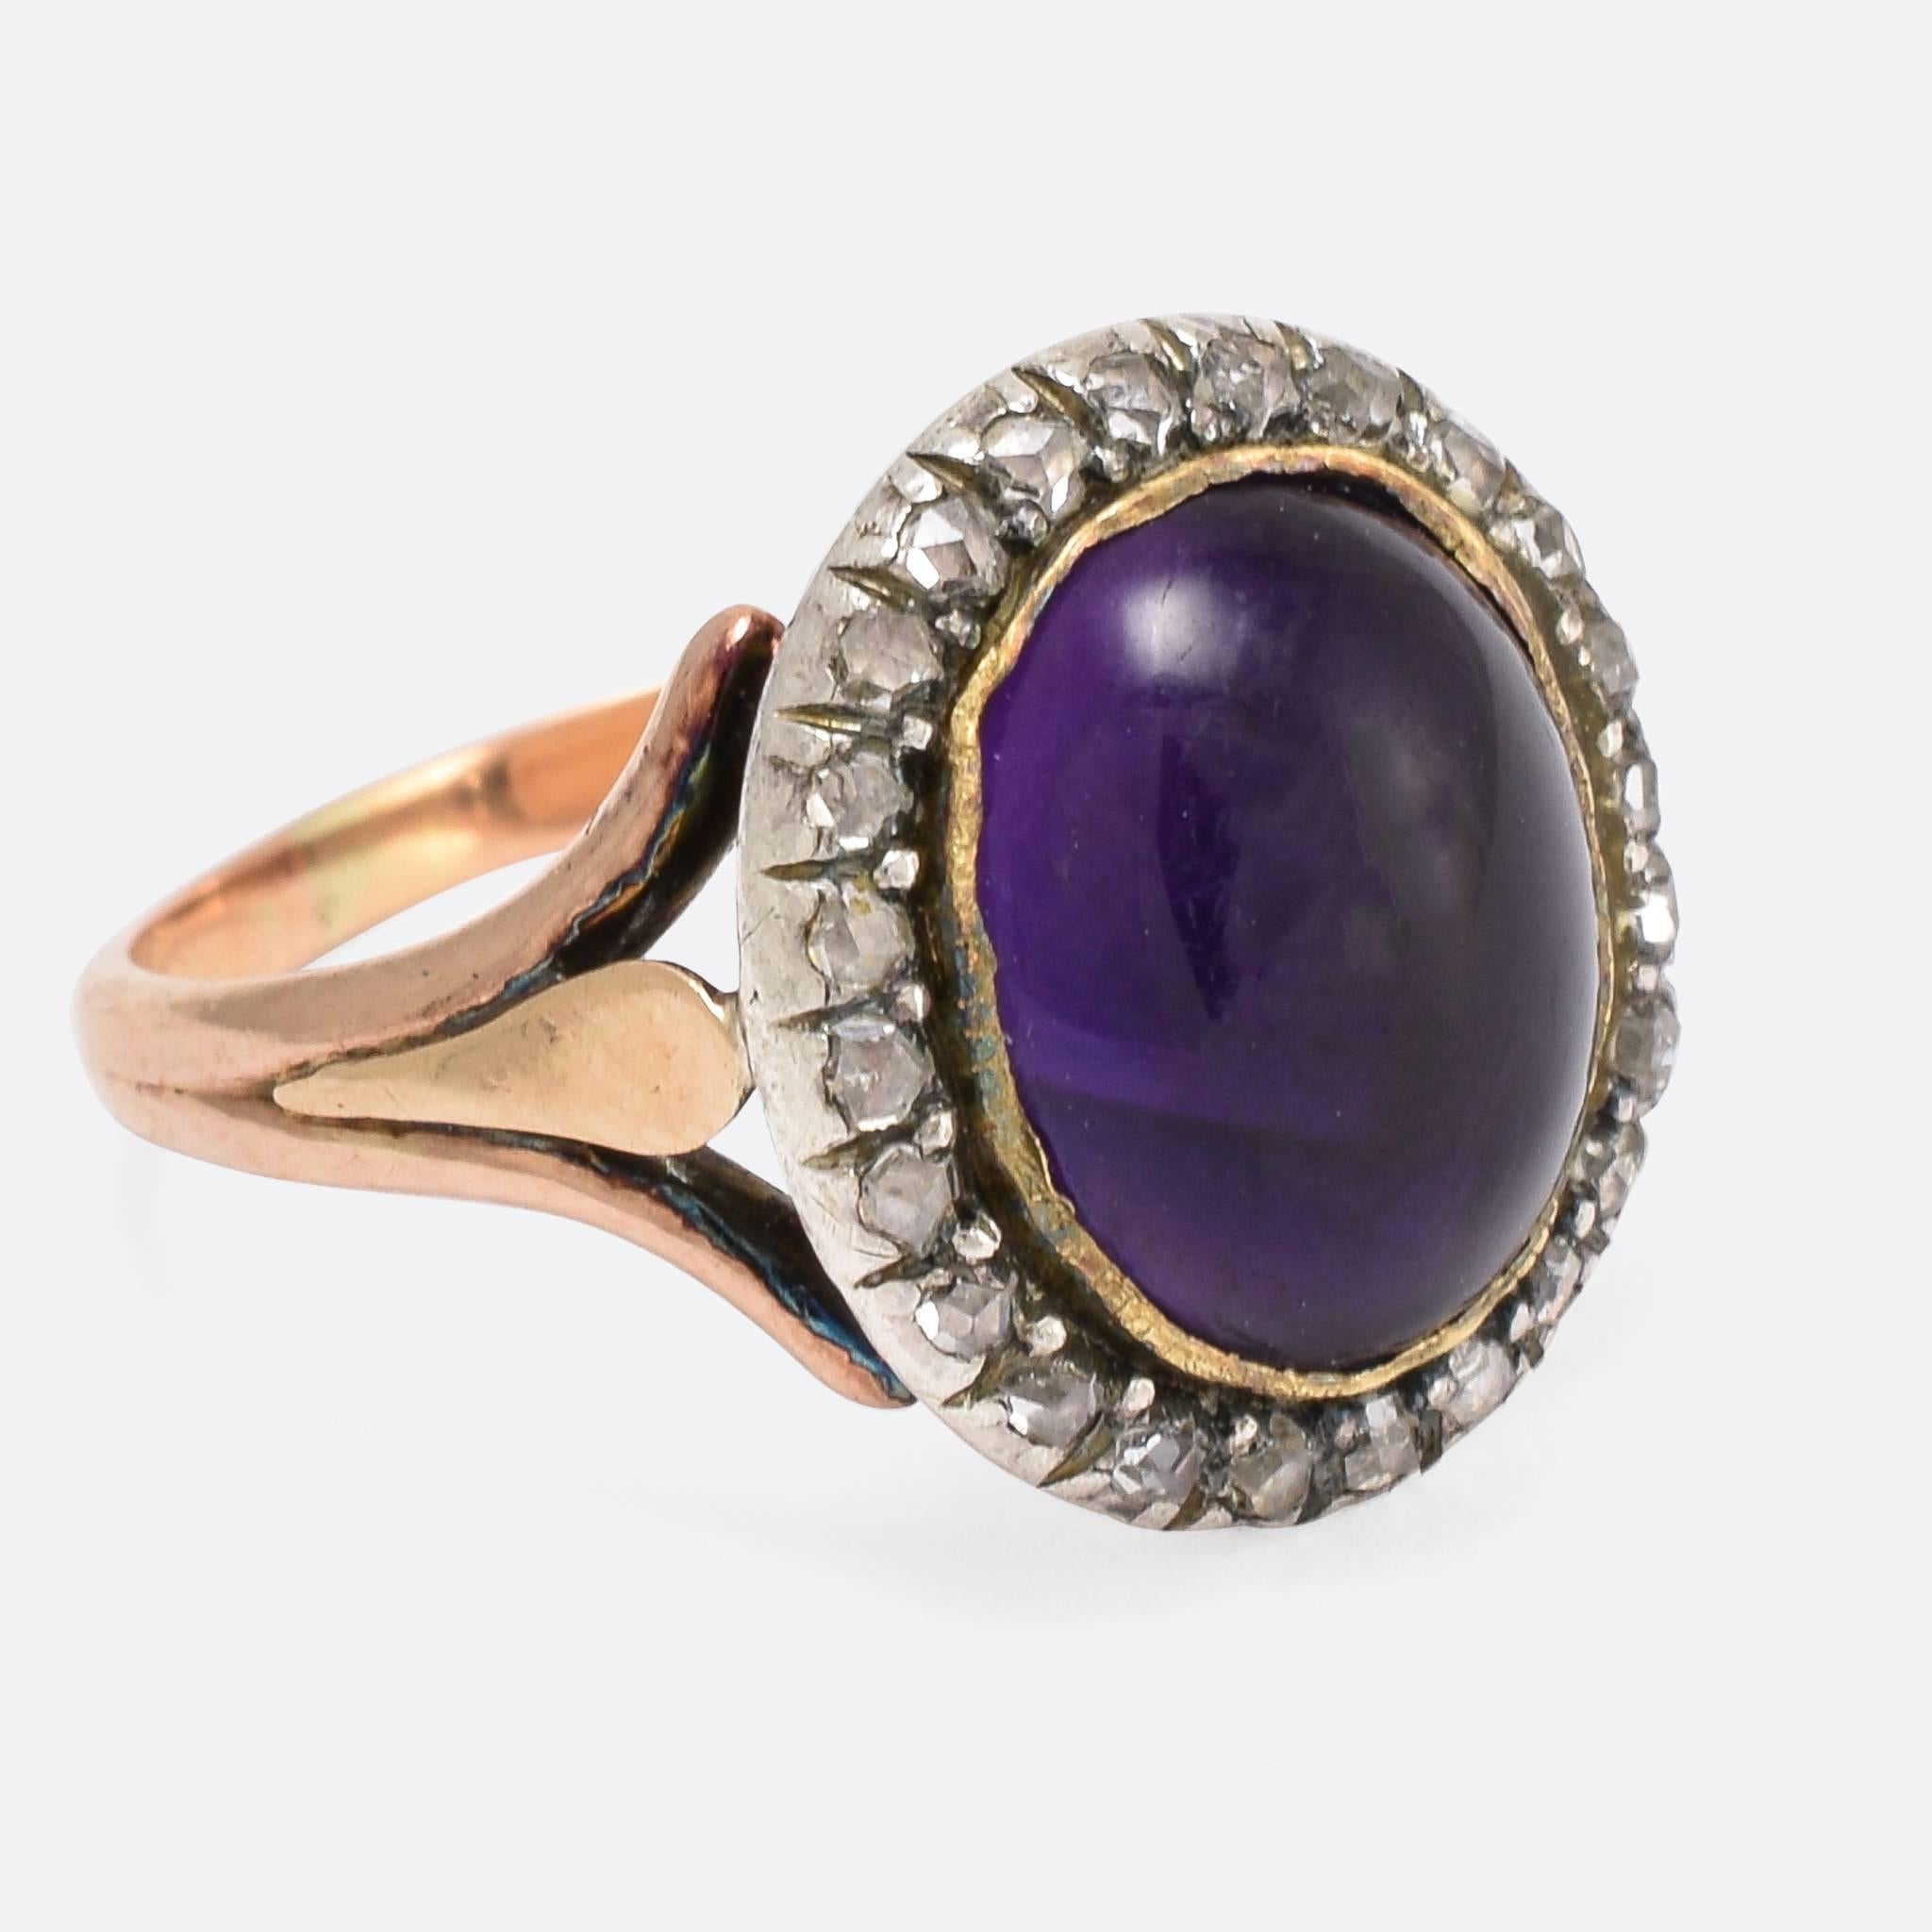 A beautiful Georgian period amethyst cluster ring, with a cluster of rose cut diamonds around the principal stone. The shoulders are spilt three ways, and the head is closed backed. Size 3.75.